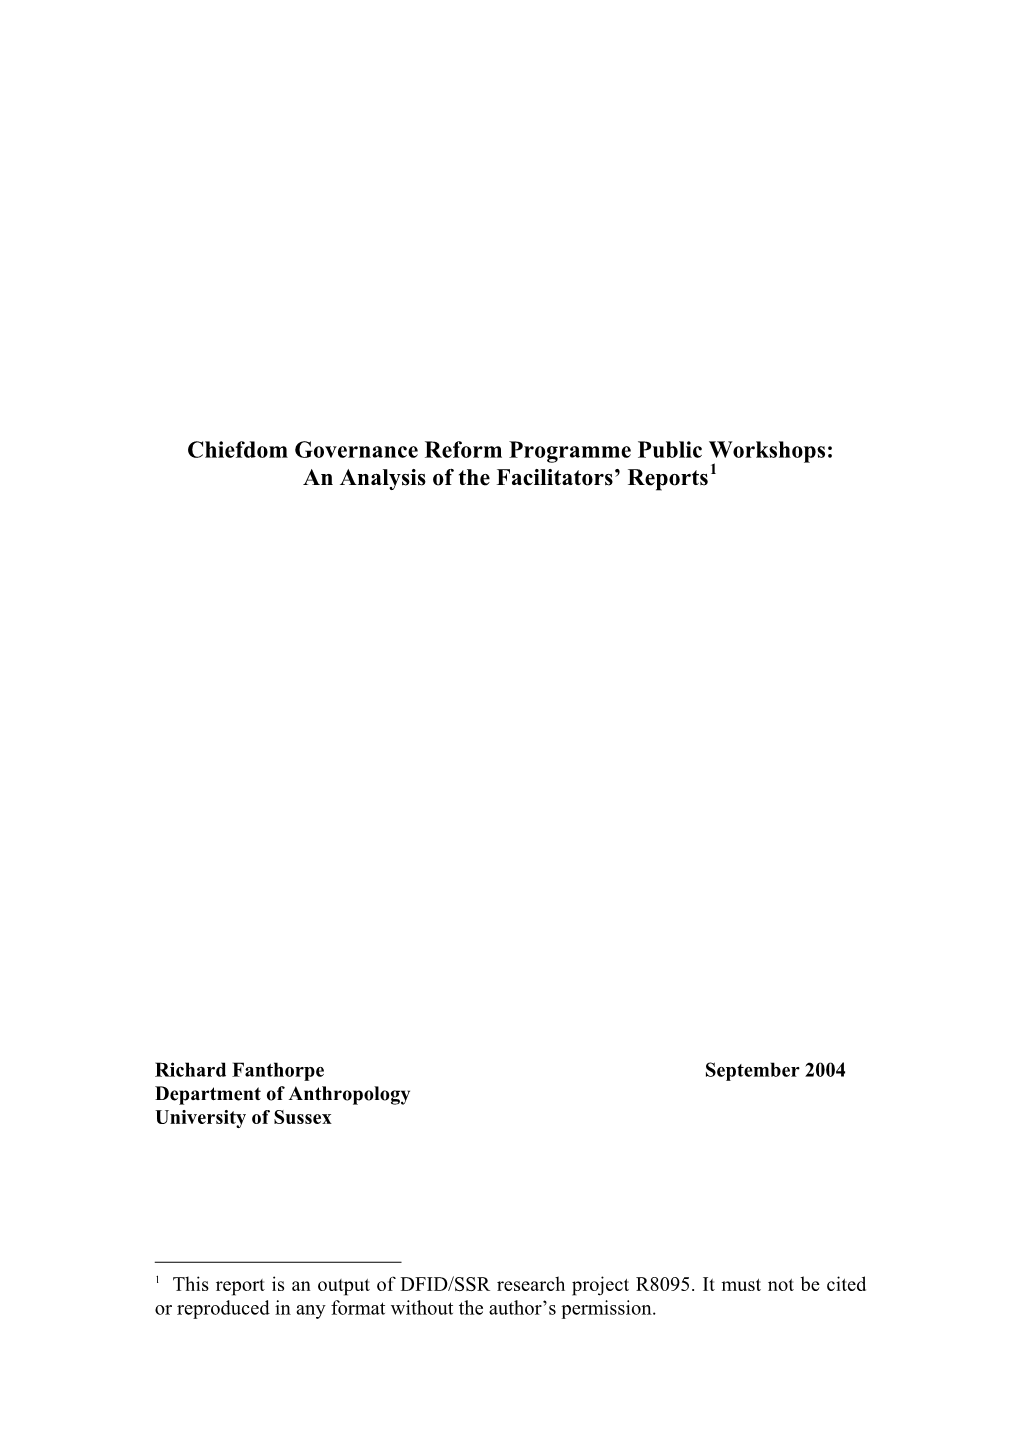 Chiefdom Governance Reform Programme Public Workshops: an Analysis of the Facilitators’ Reports1